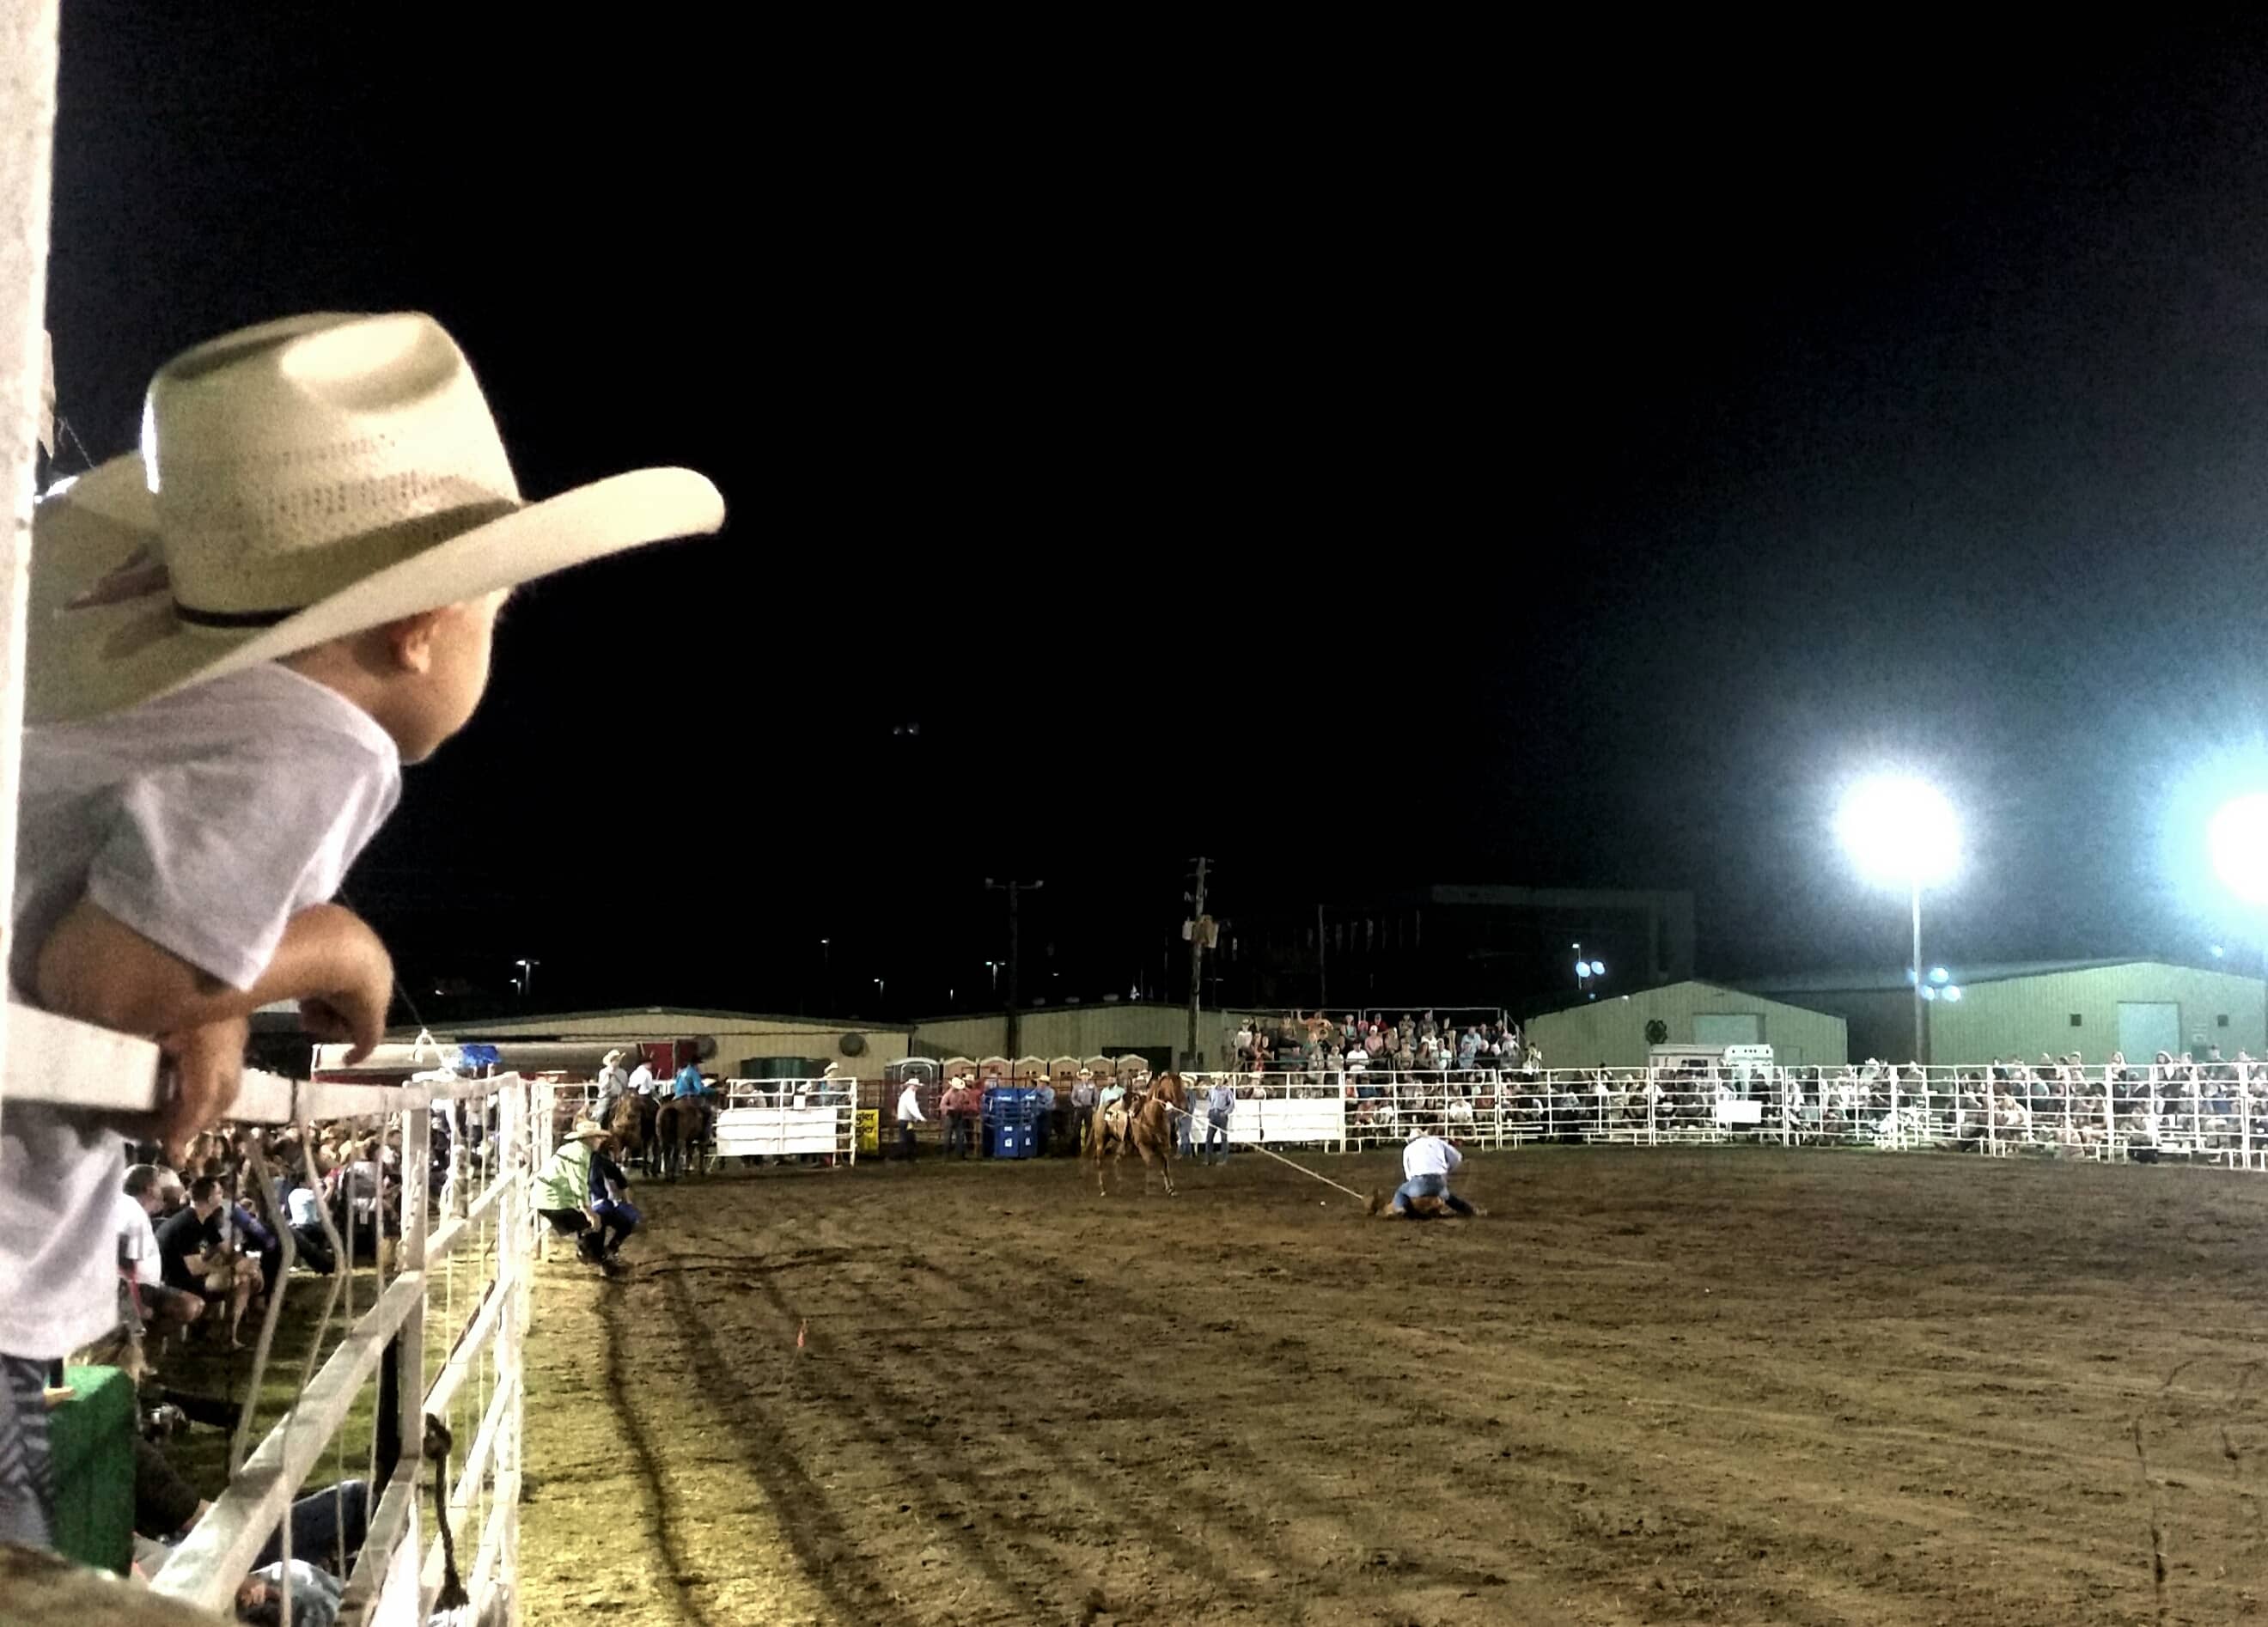 little-cowboy-watching-rodeo-in-his-future-with-bi-2021-12-22-00-54-34-utc